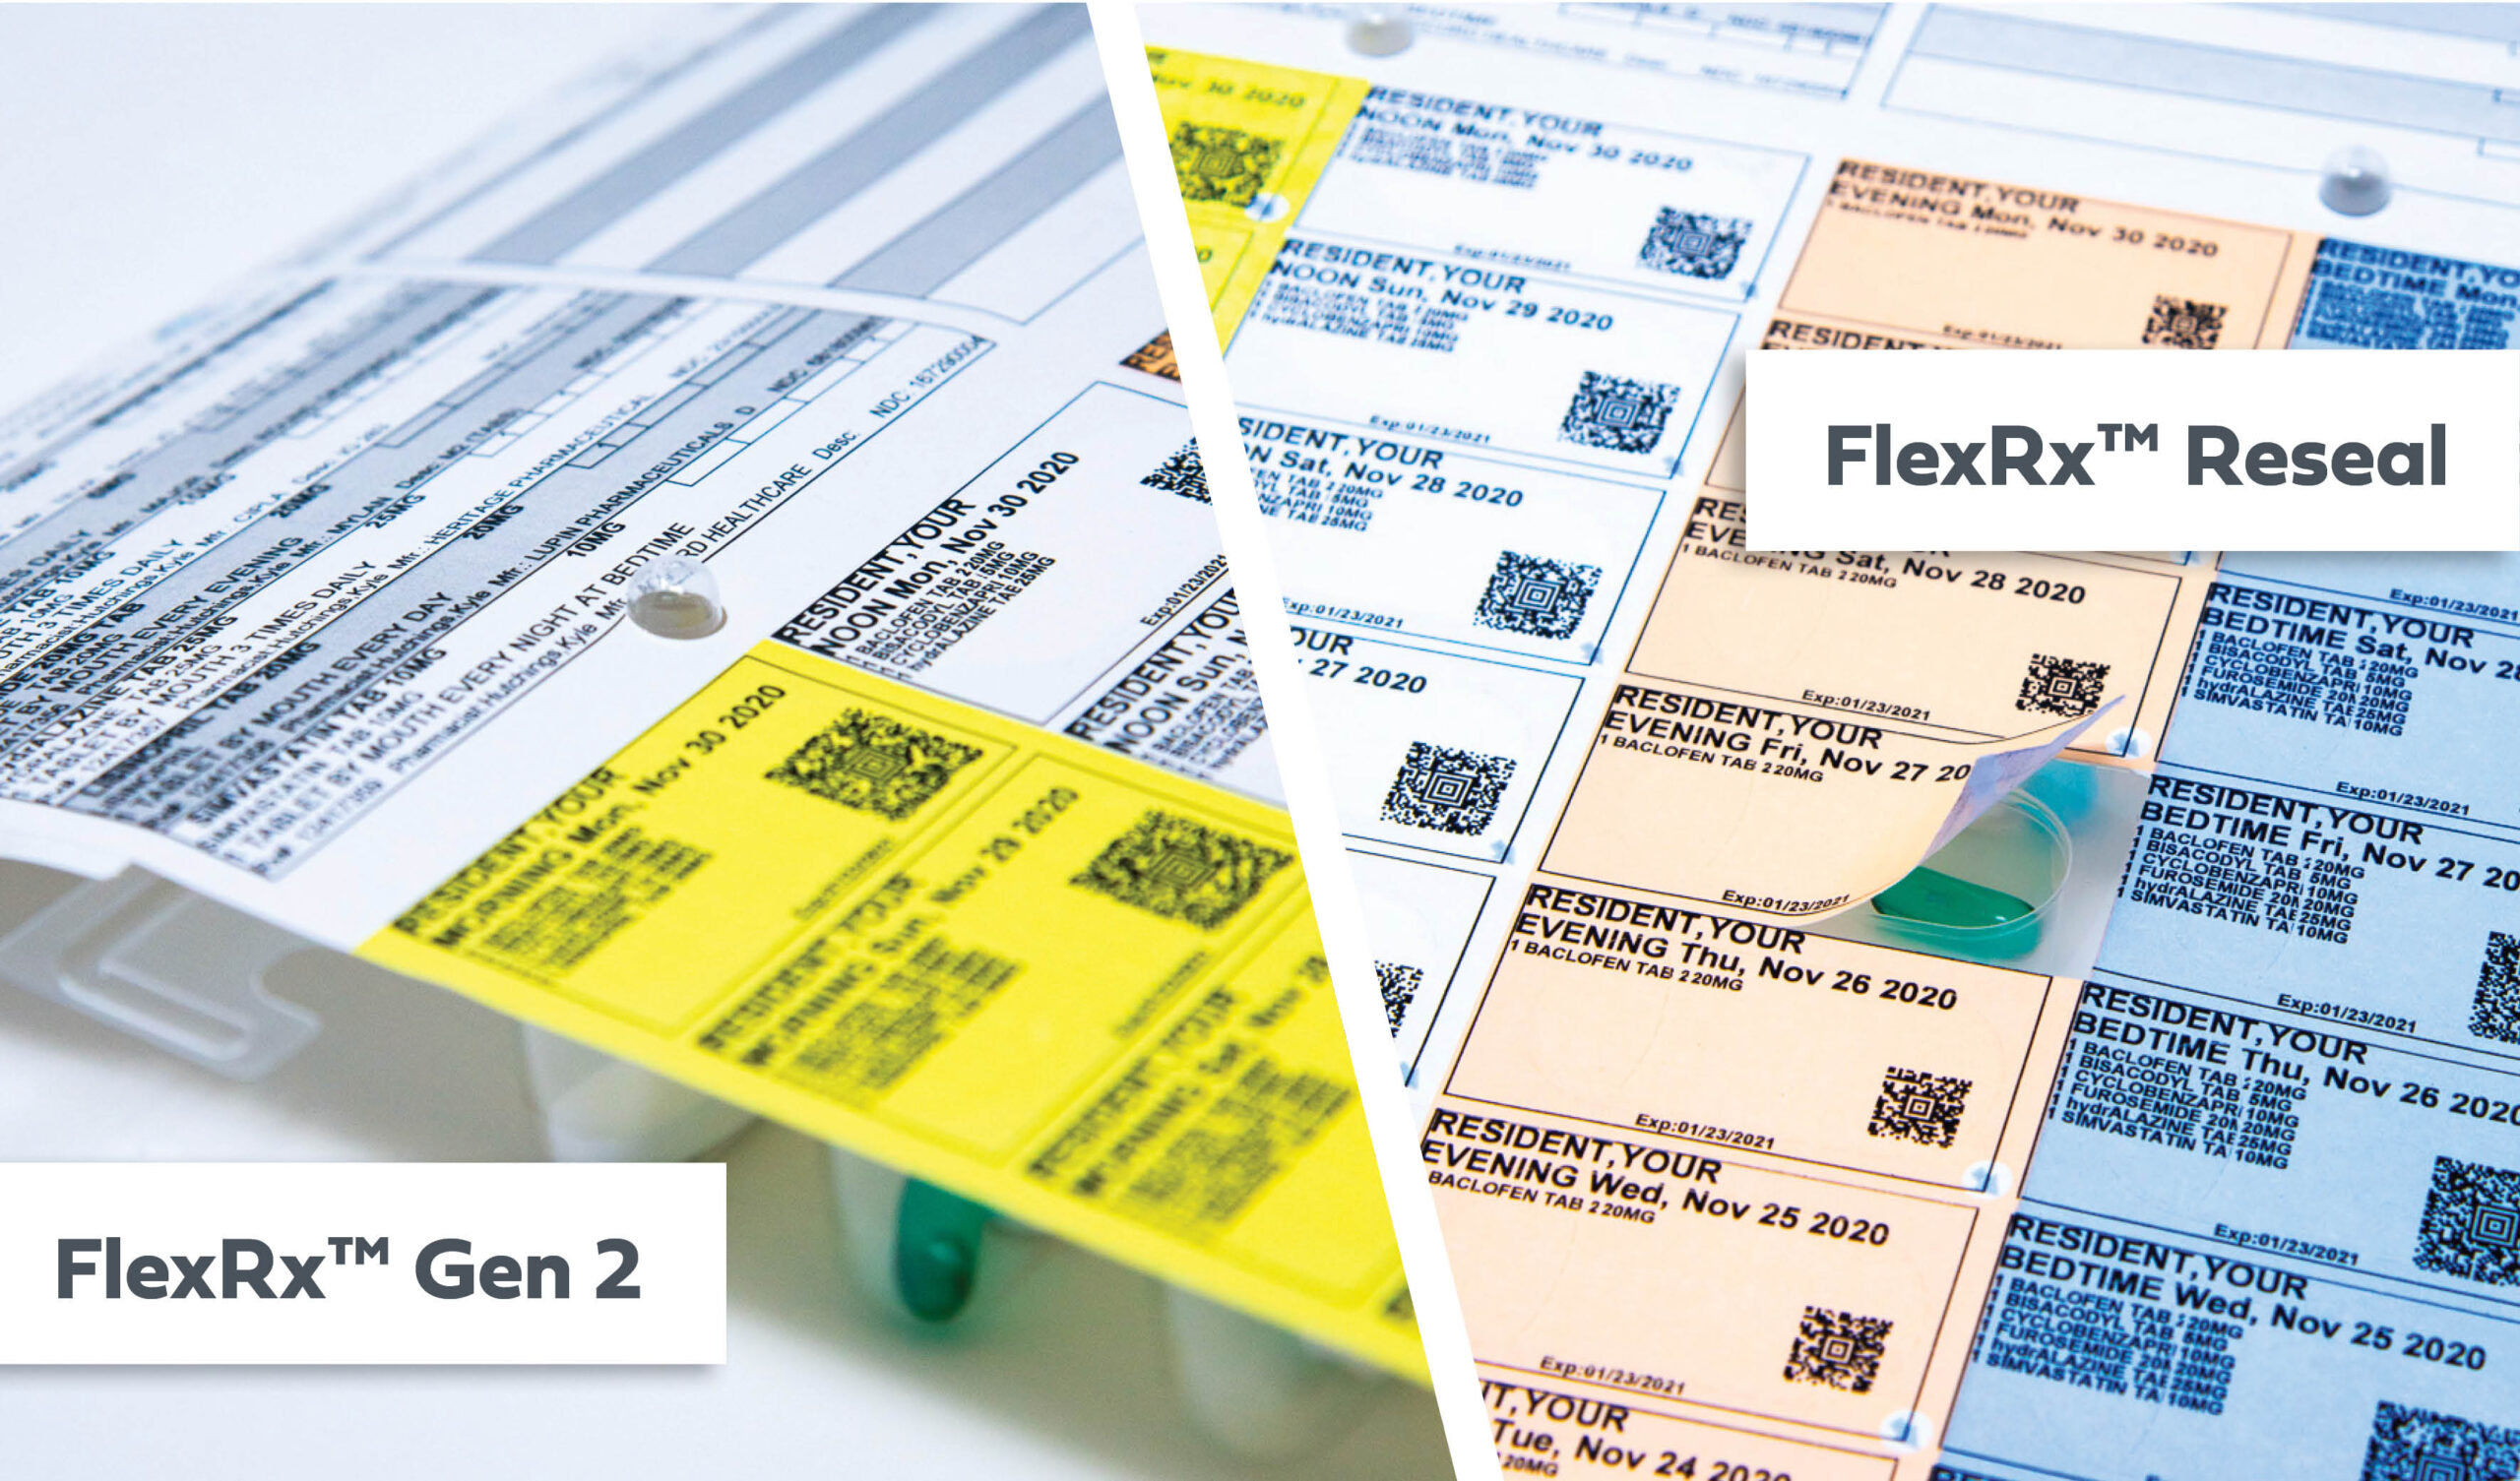 Image featuring new medication adherence products: FlexRx Gen 2 and FlexRx Reseal